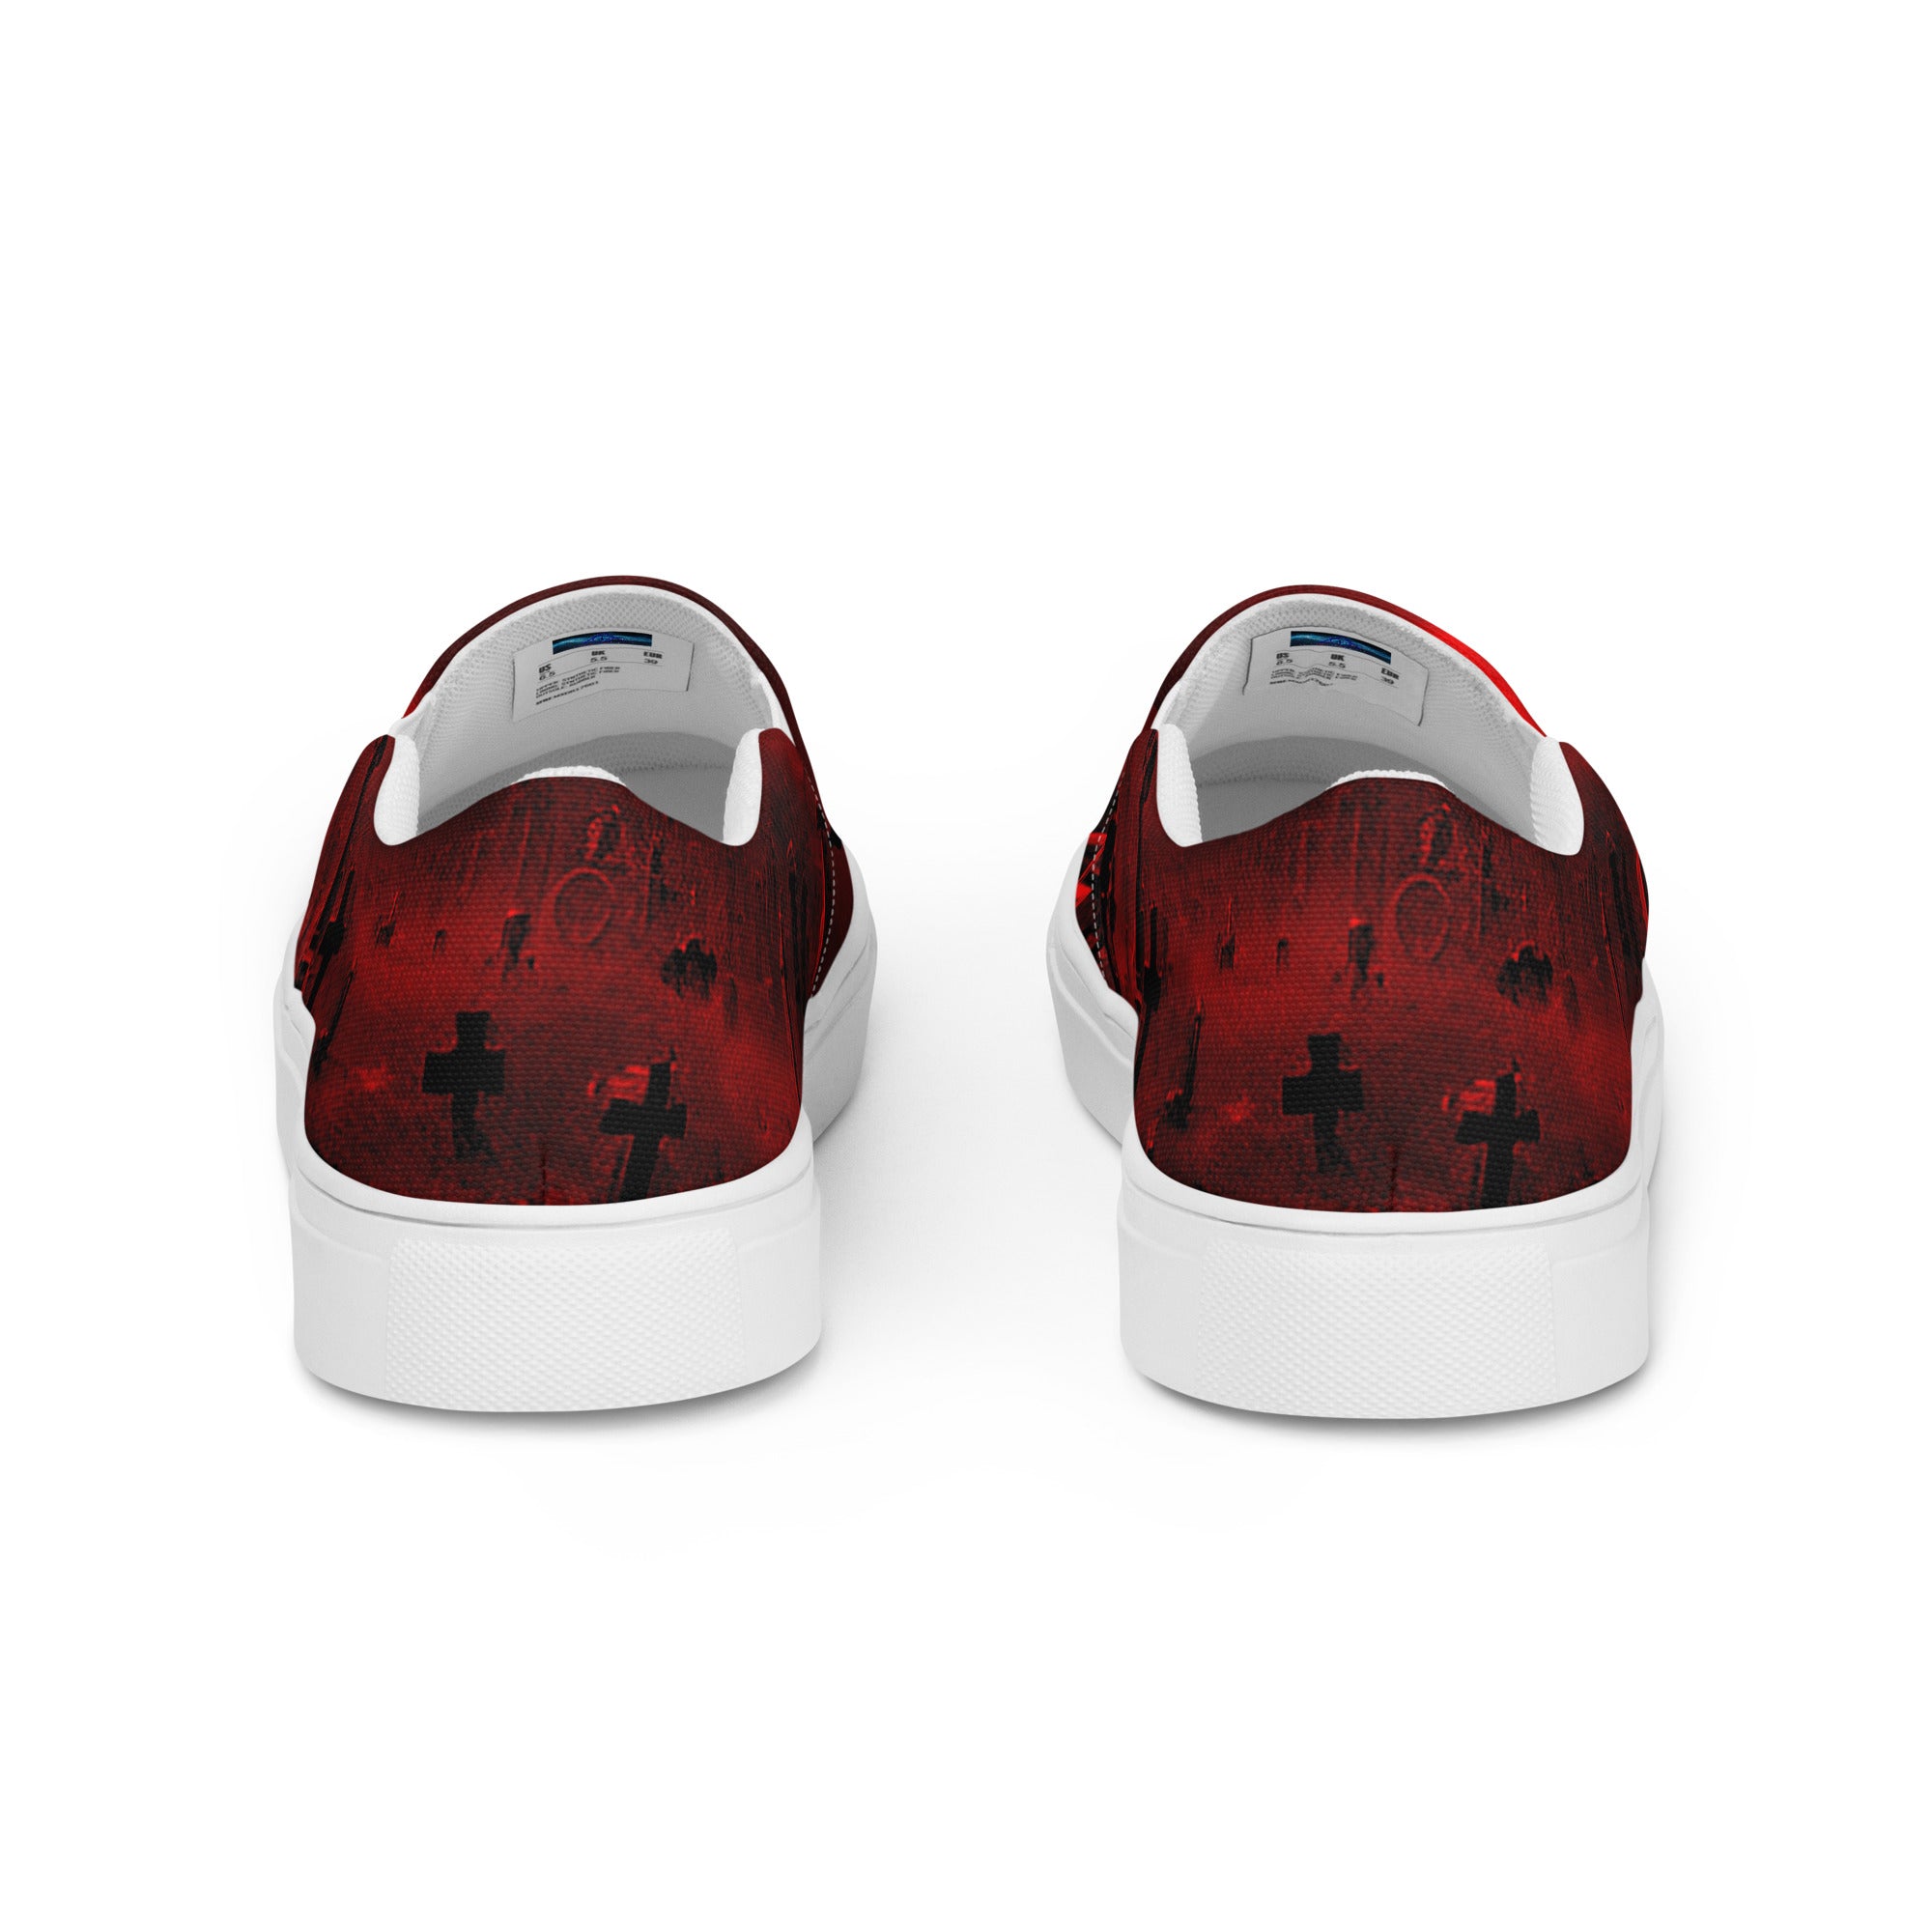 Blood Red Cemetery Tombstone Graveyard Scene Men’s slip-on canvas shoes